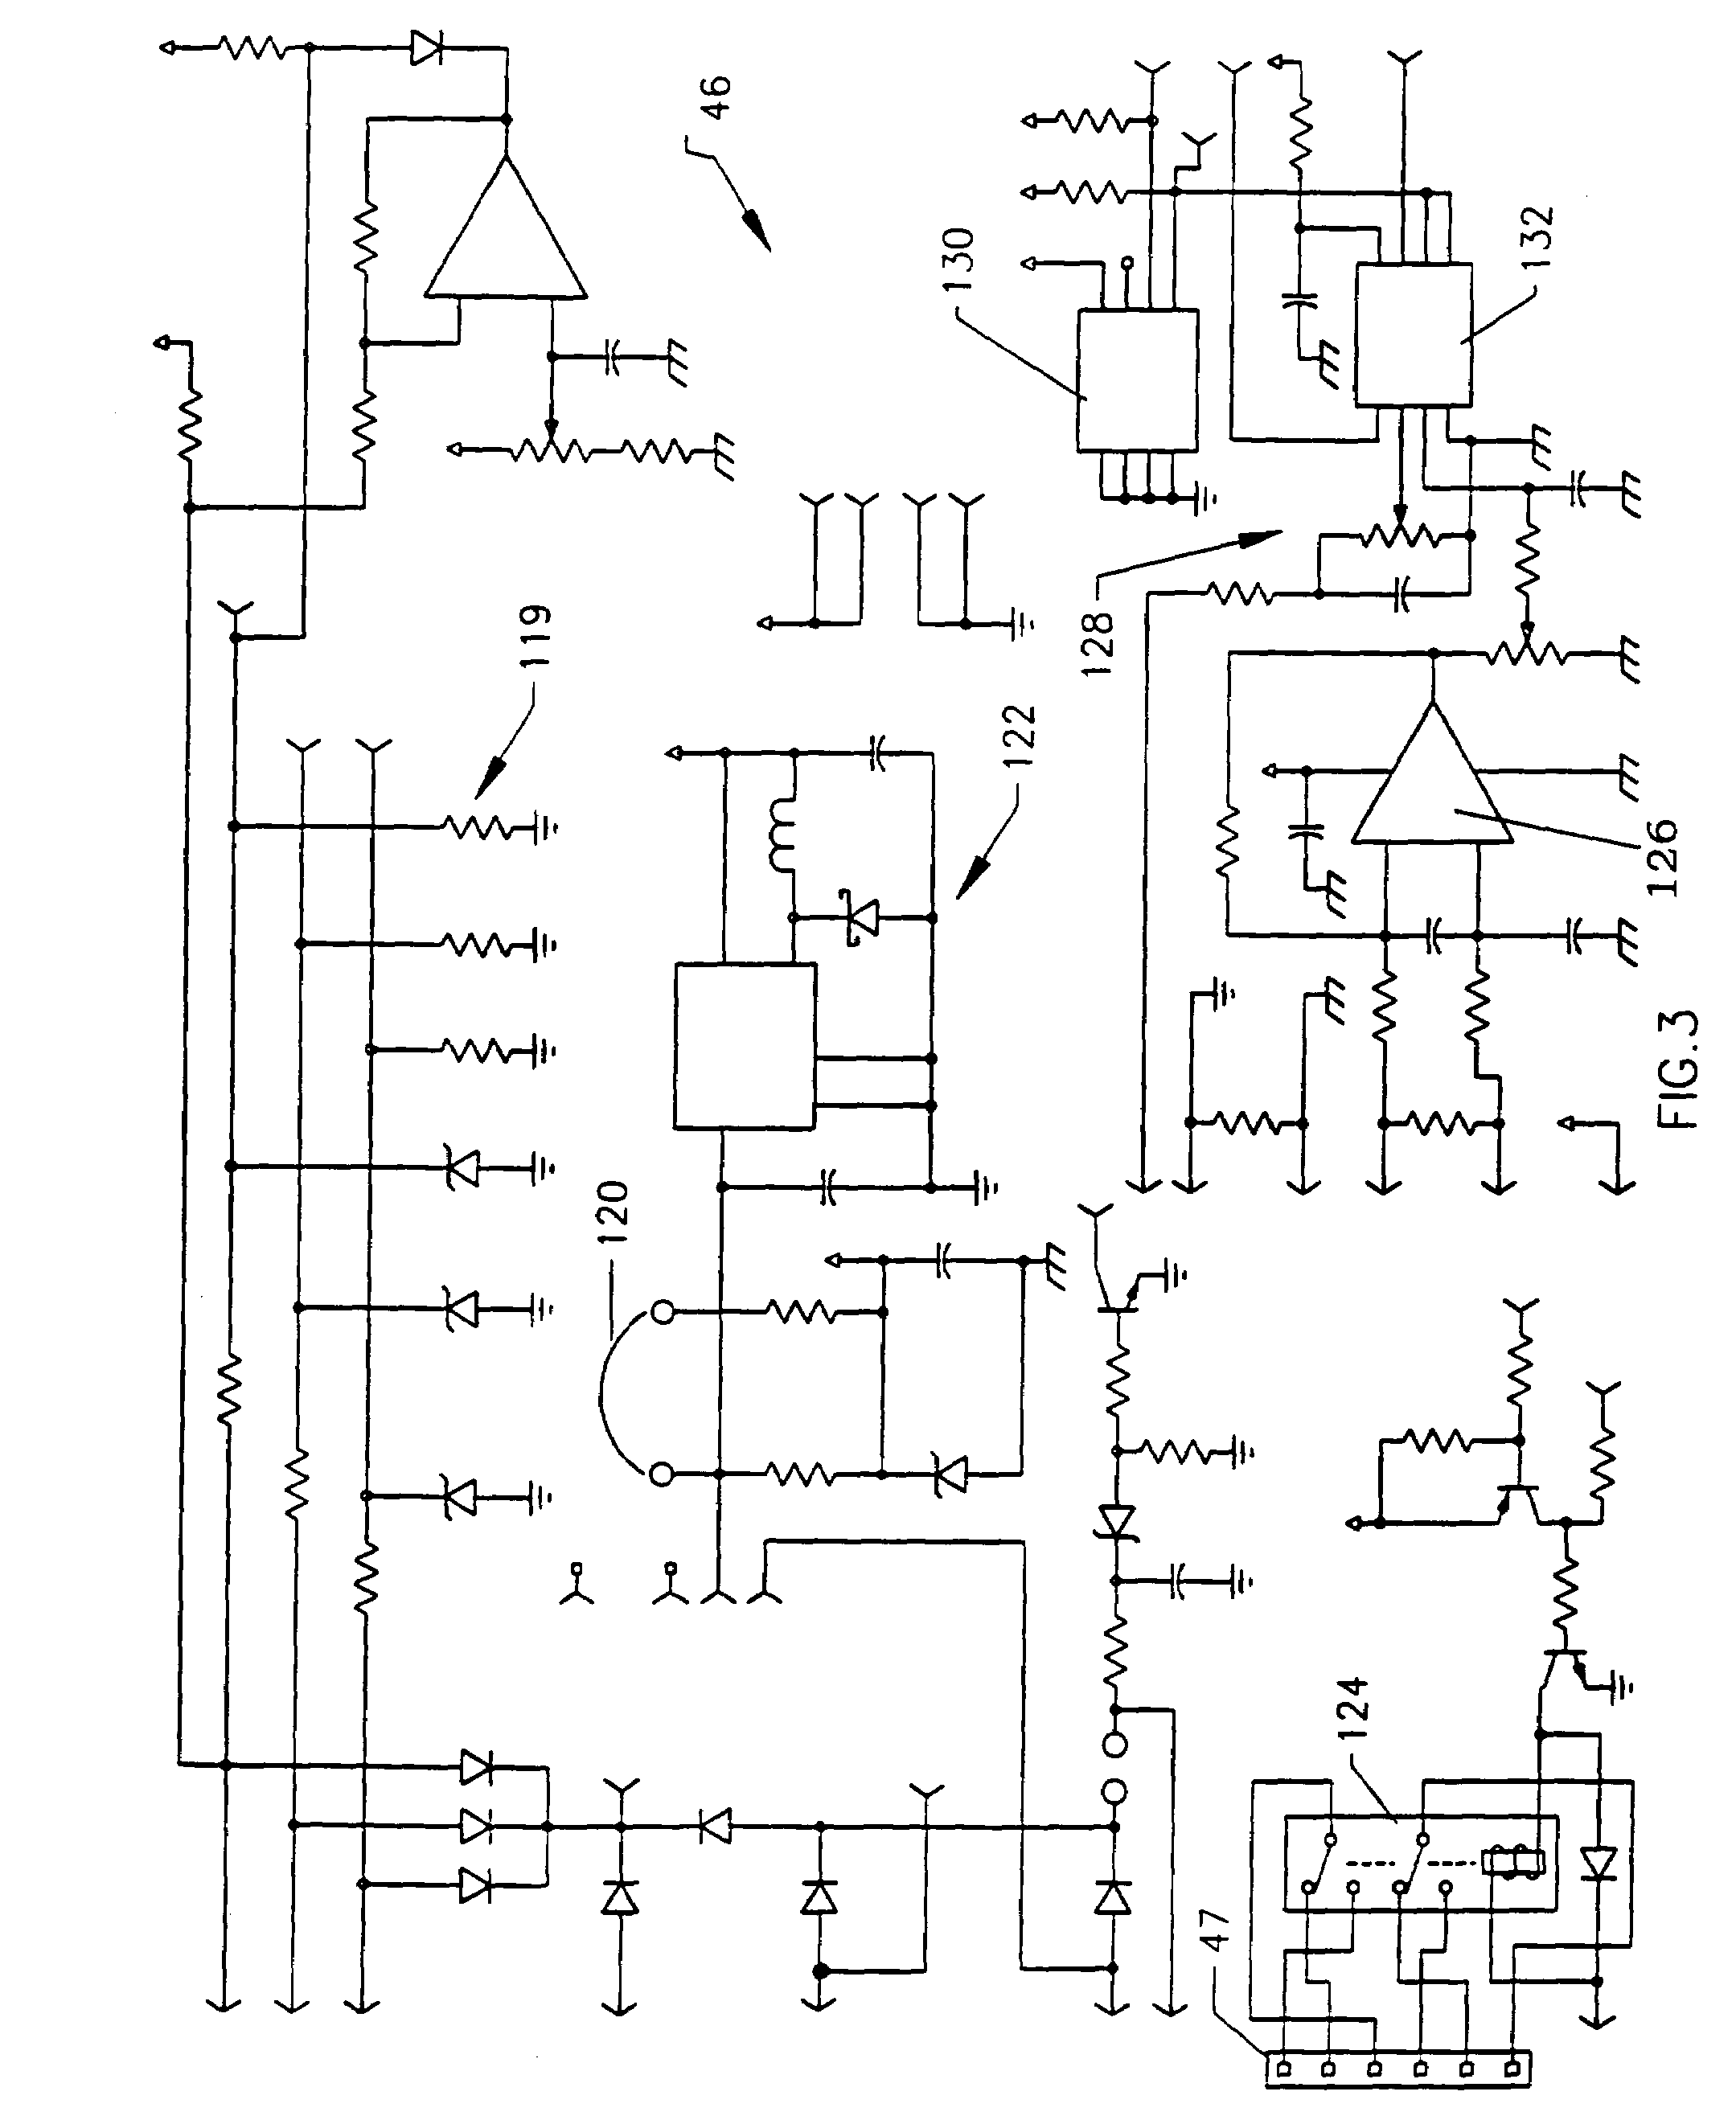 Arrangement for testing battery while under load and charging